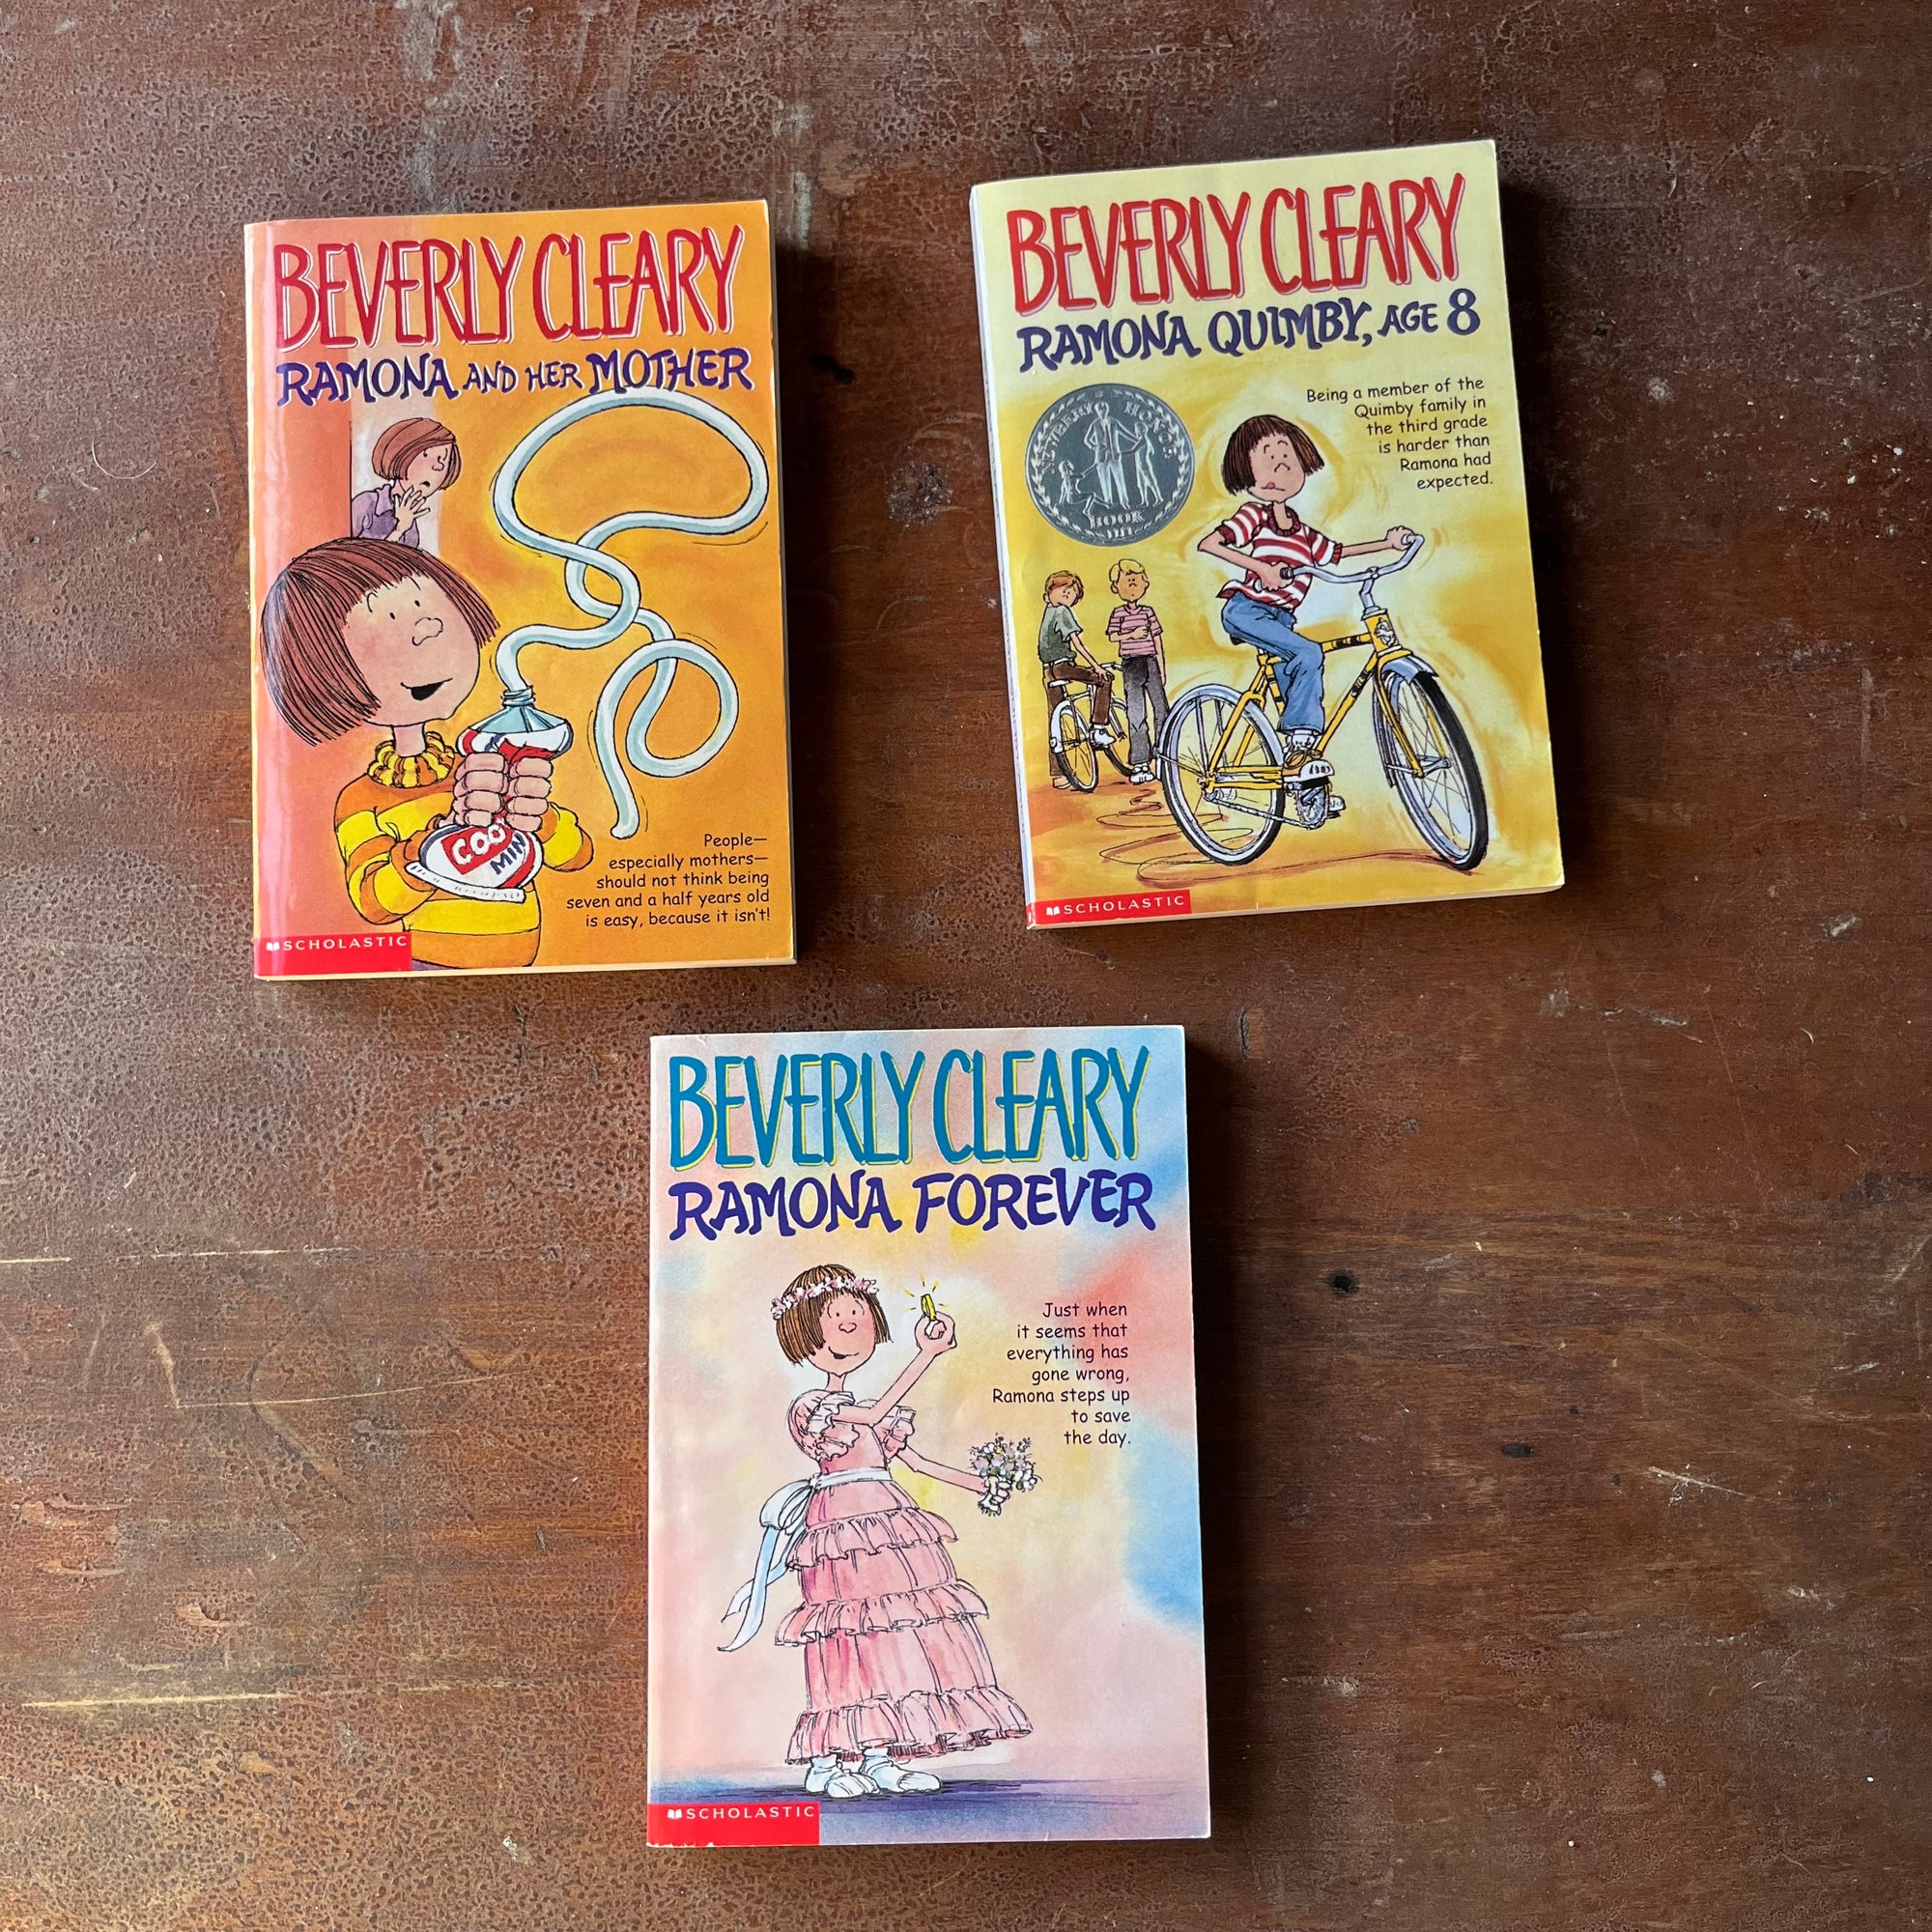 Beverly Cleary Book Set-RAmona and her Mother, Ramona Quimby, Age 8, and Ramona Forever-Scholastic Inc. Books-view of the bright & colorful front covers with illustrations by Alan Tiegreen